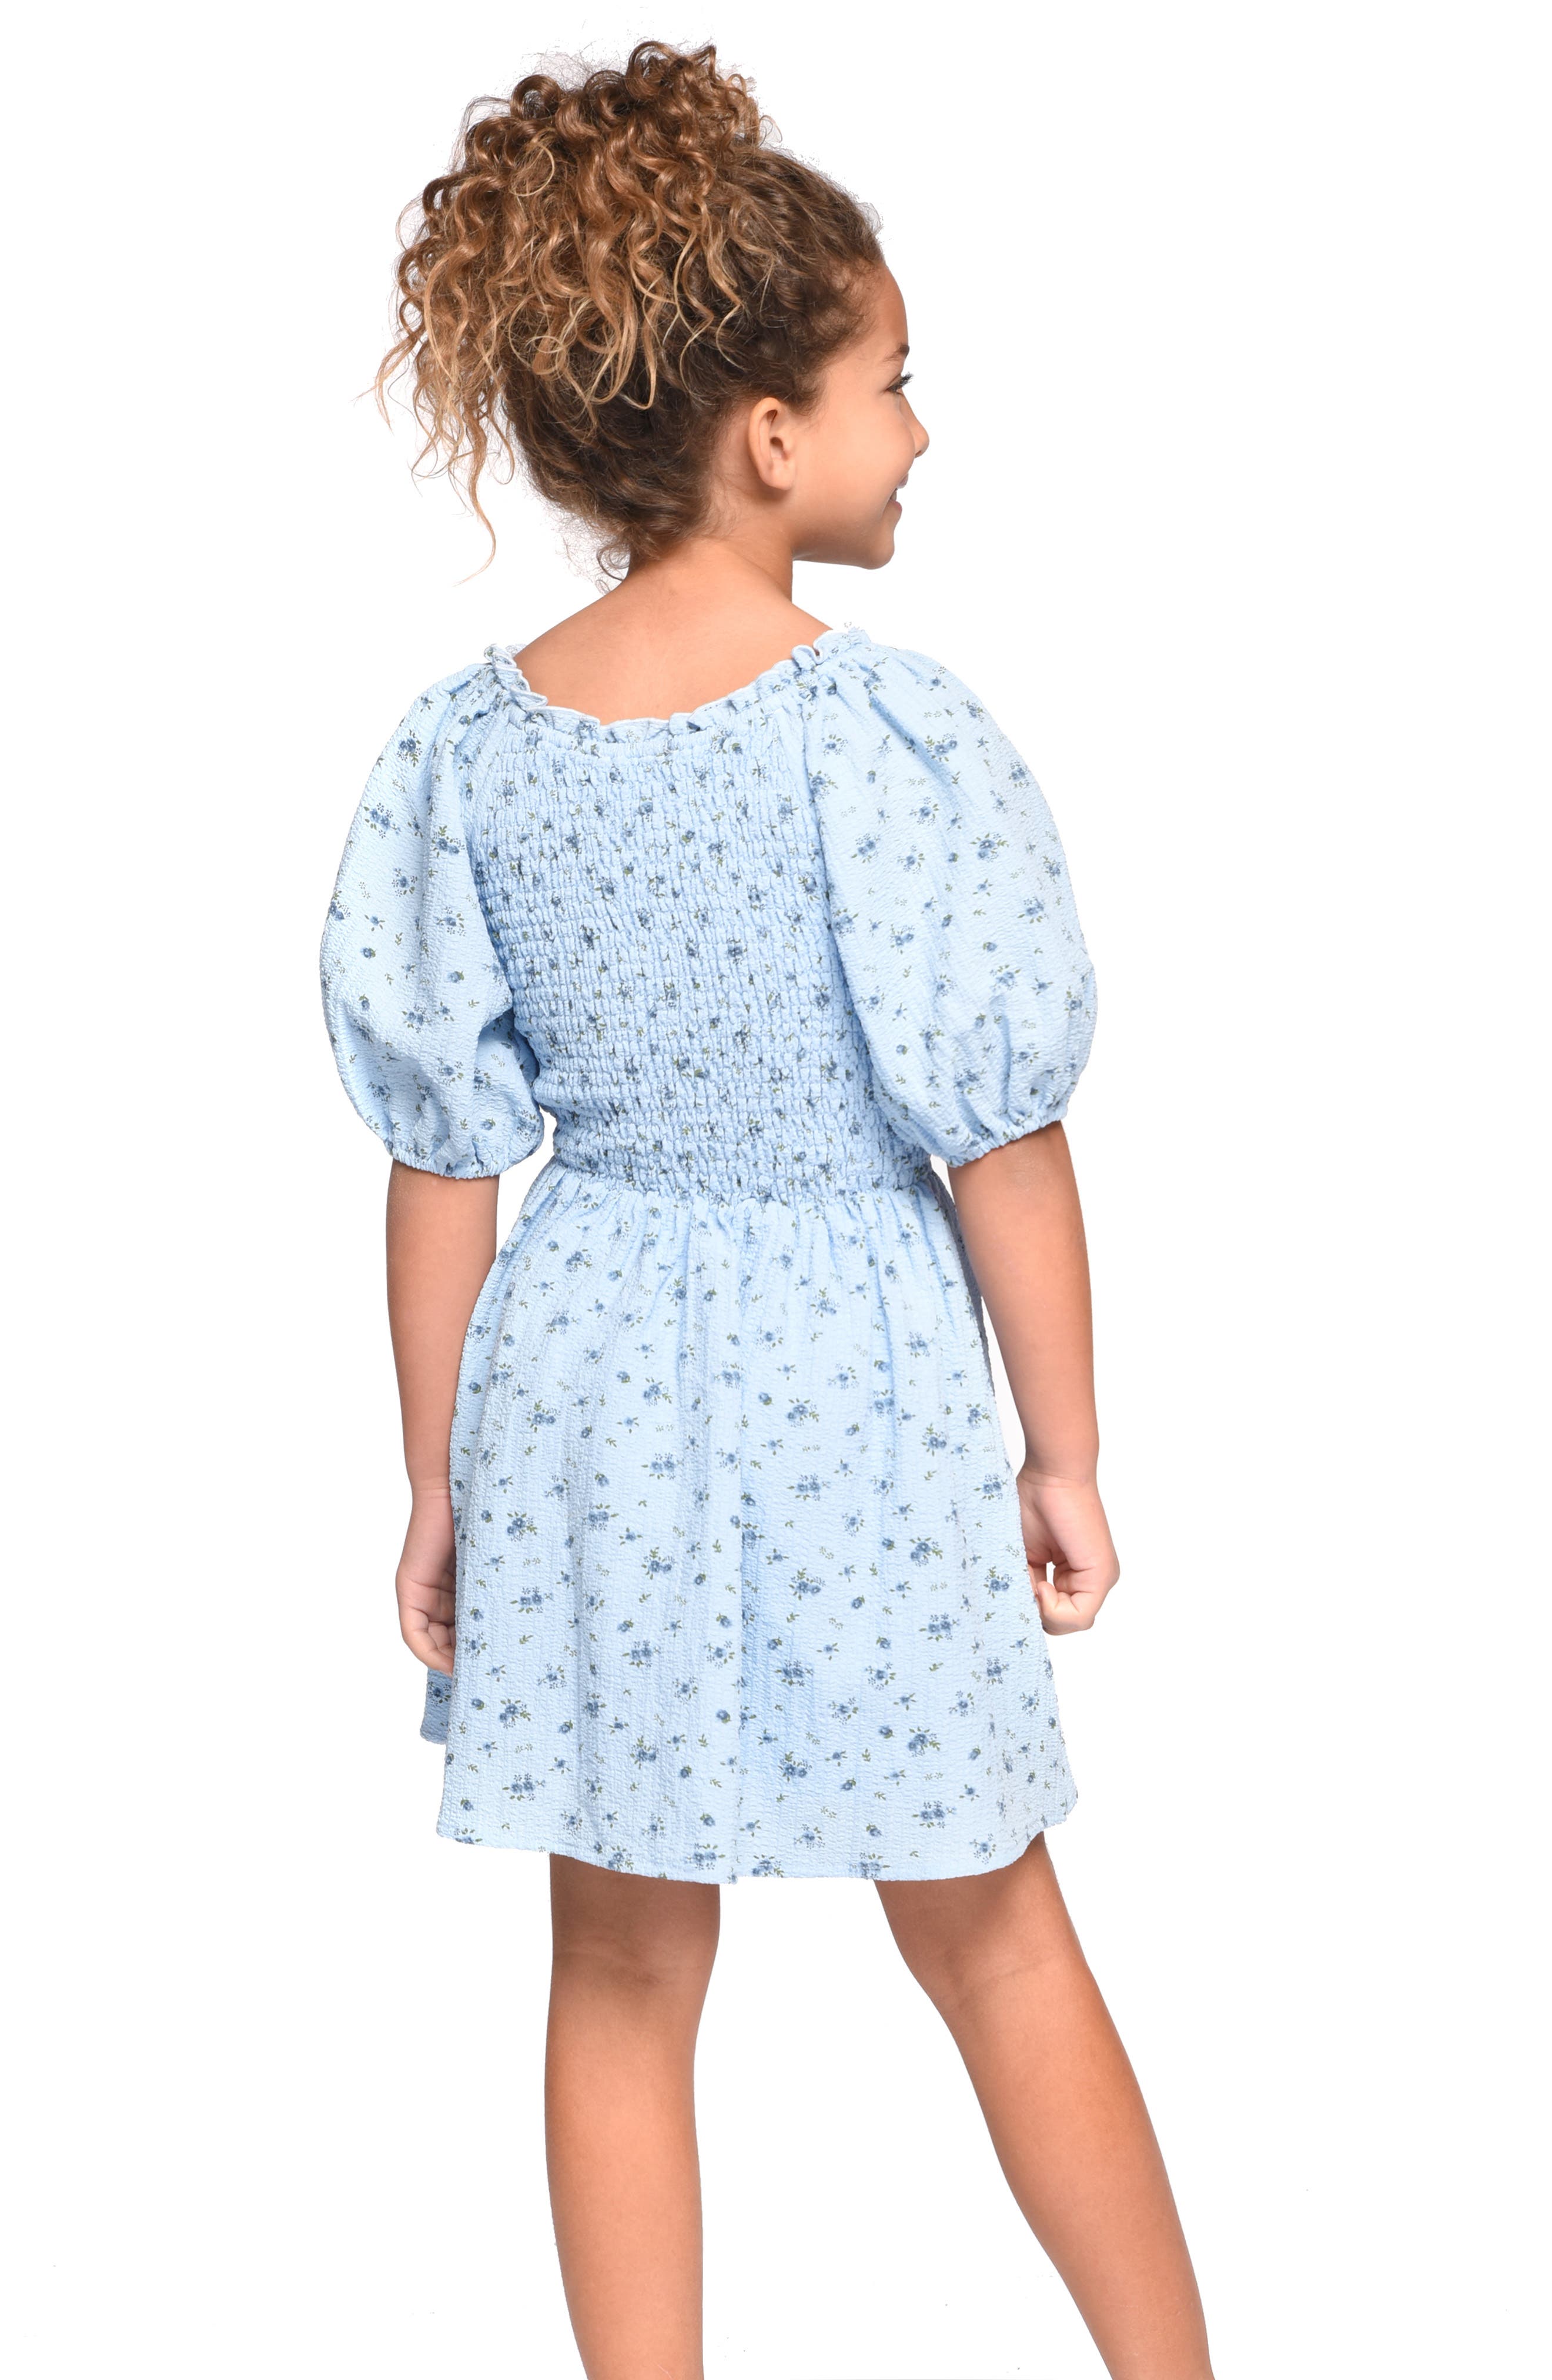 Nordstrom Clothing Dresses Puff Sleeve Dress Kids Gingham Puff Sleeve Cotton Dress in Off-White at Nordstrom 